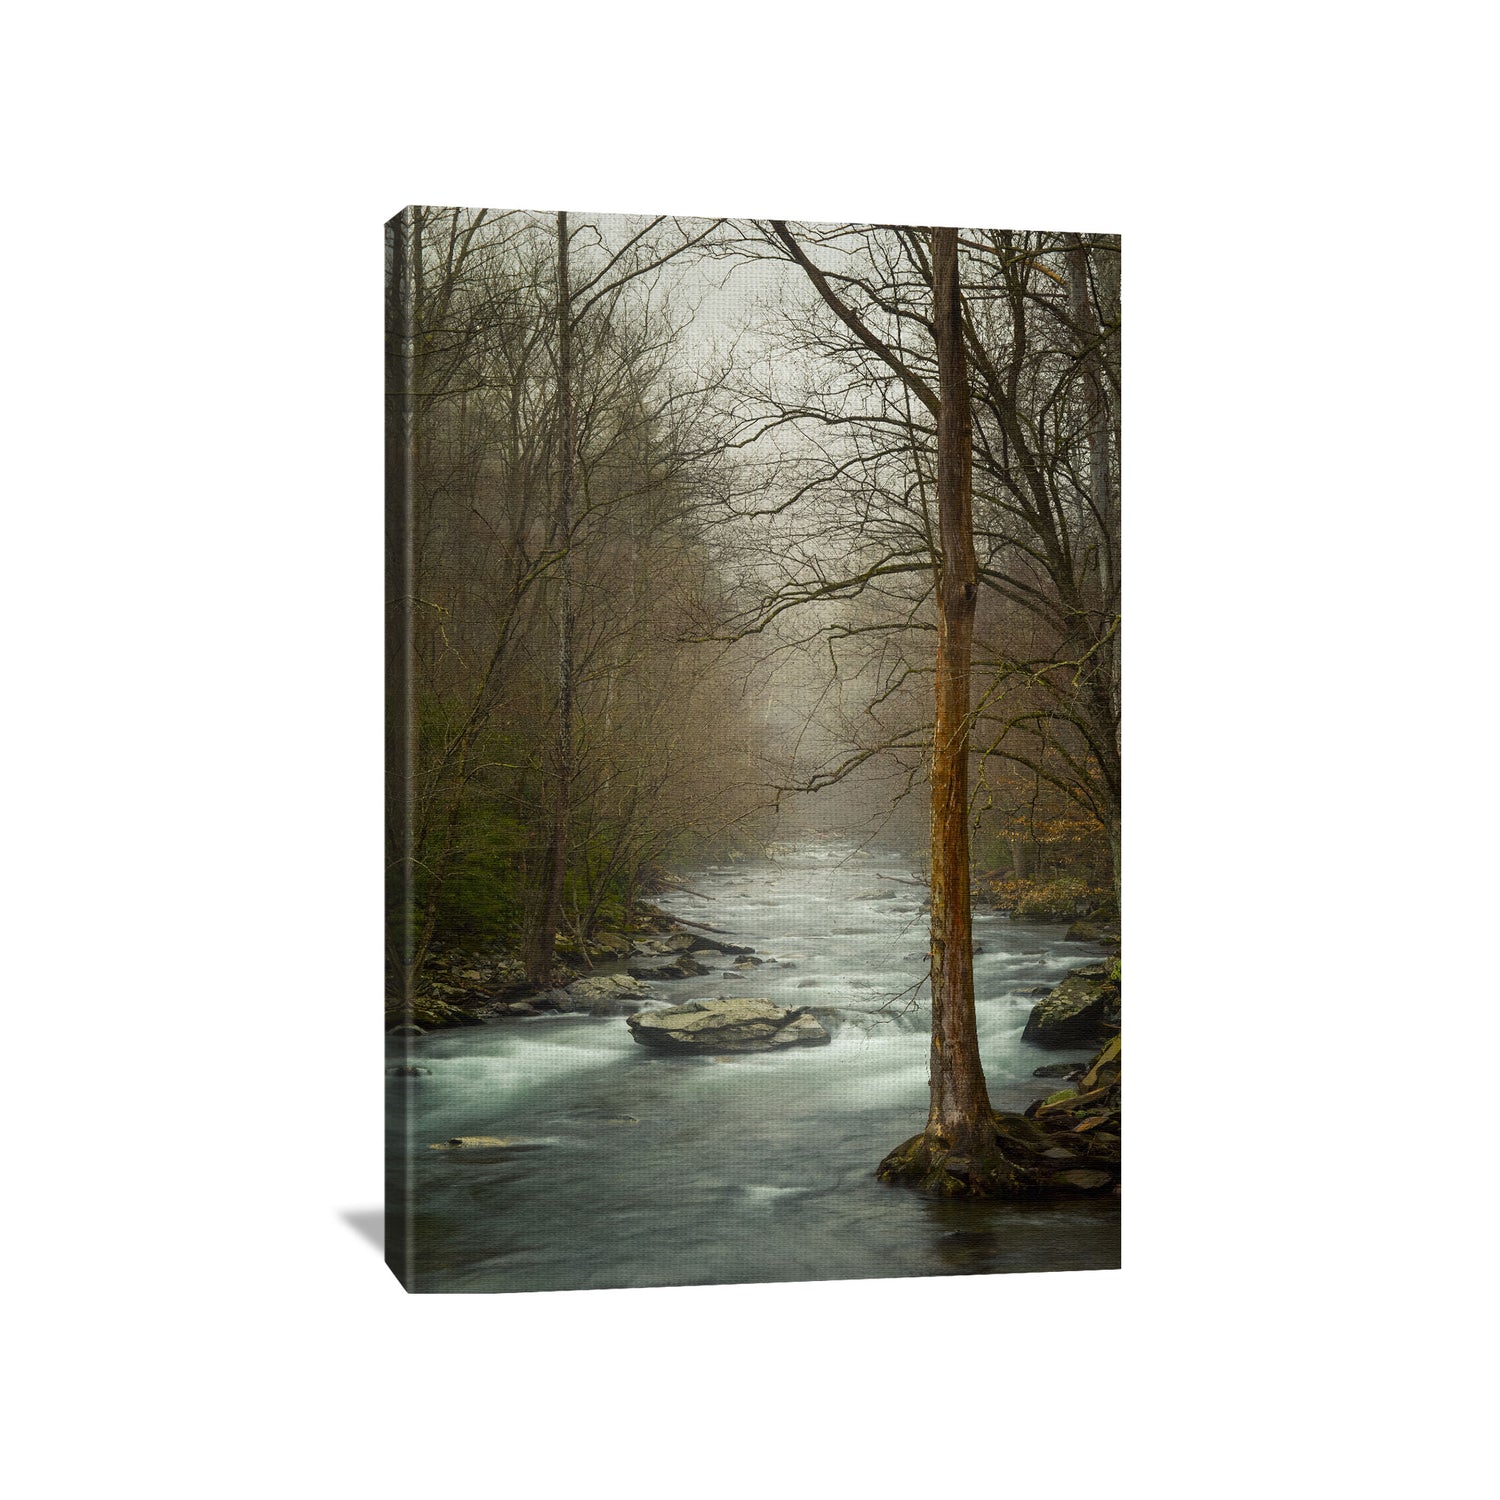 Canvas wall art featuring the tranquil Little River in the Great Smoky Mountains, perfect for bringing a touch of nature's peace into your living space.